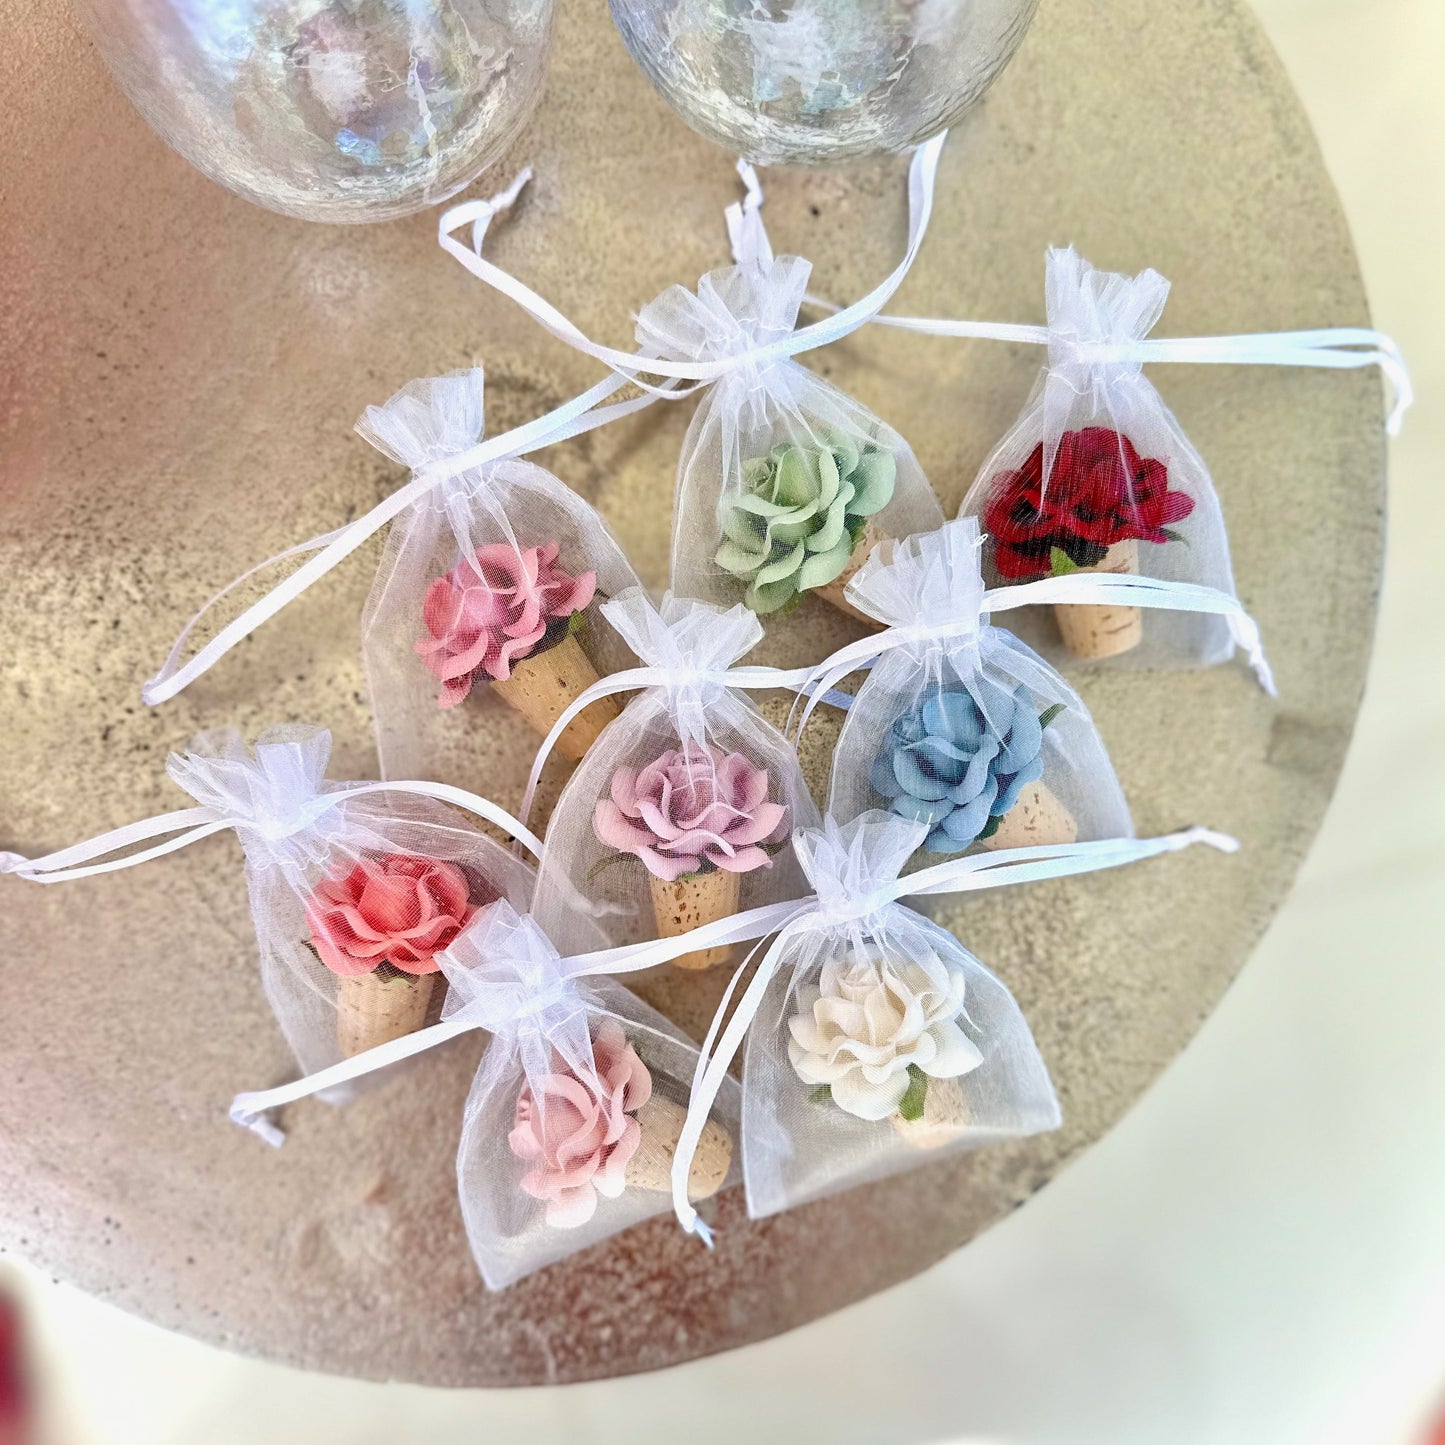 Wine Stopper Wedding Favors in 32 Custom Colors, FREE Organza Favor Bags Included!